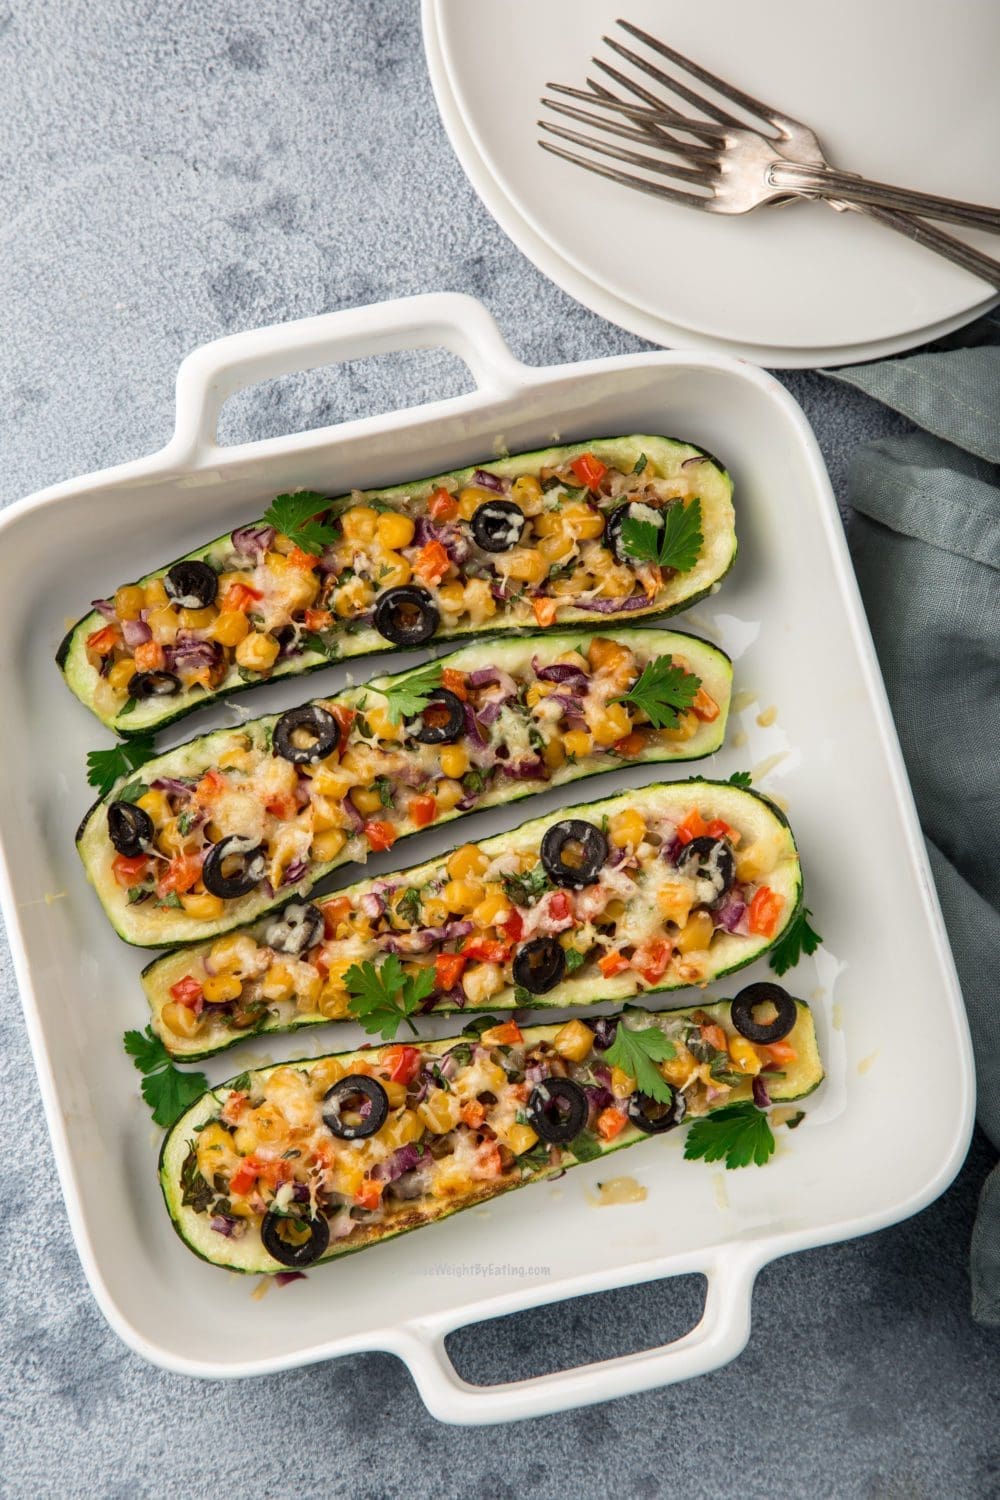 Baked Stuffed Zucchini Boats The Best Healthy Side Dishes for Chicken